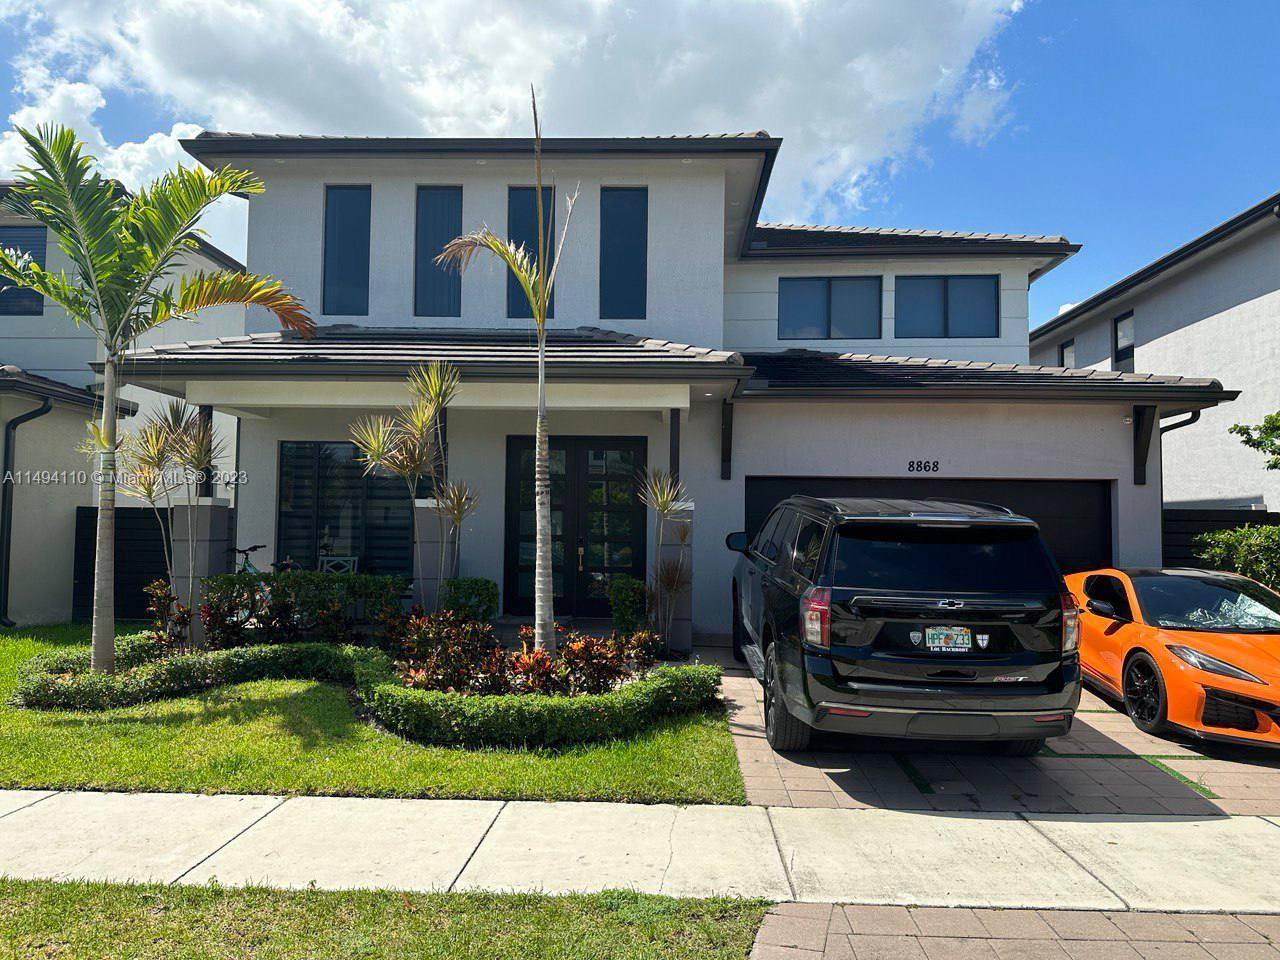 Photo of 8868 NW 161st Ter in Miami Lakes, FL